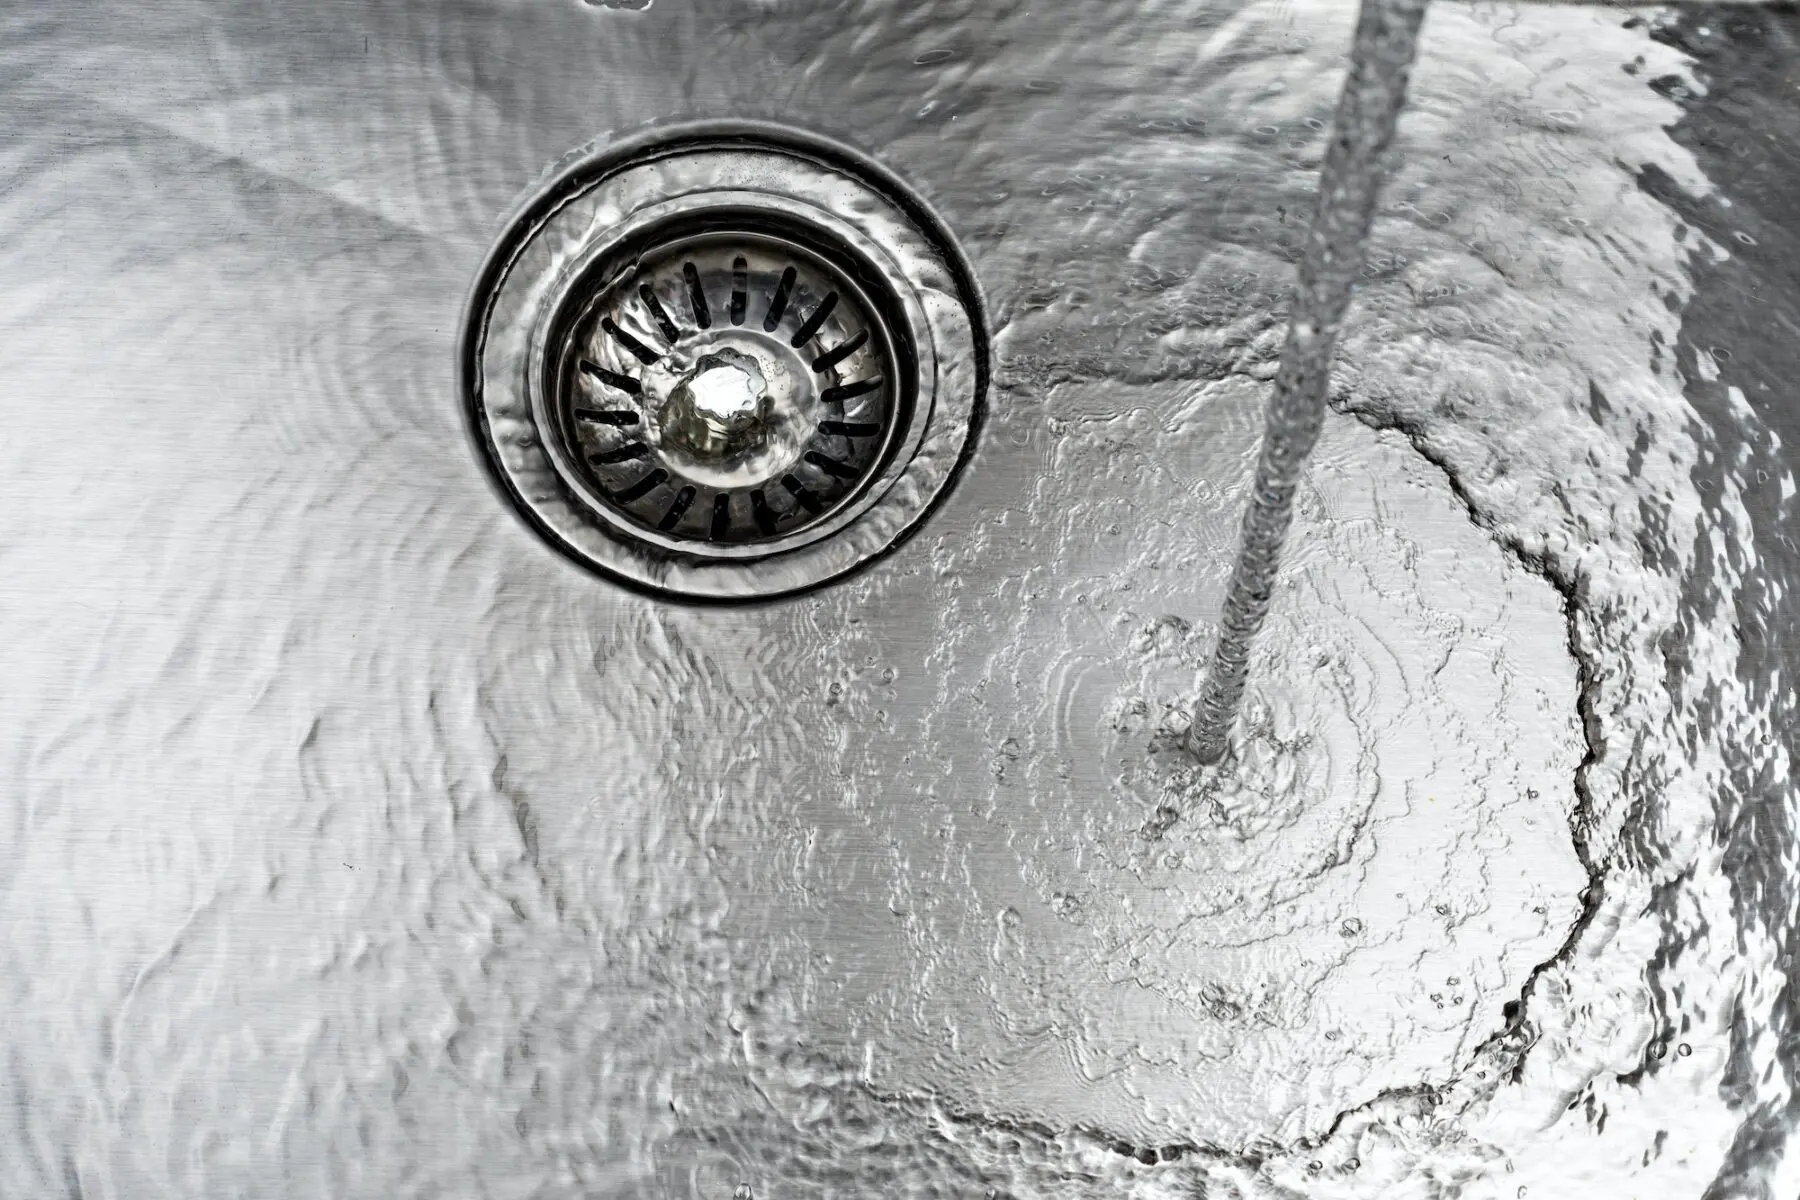 water drains down a stainless steel sink